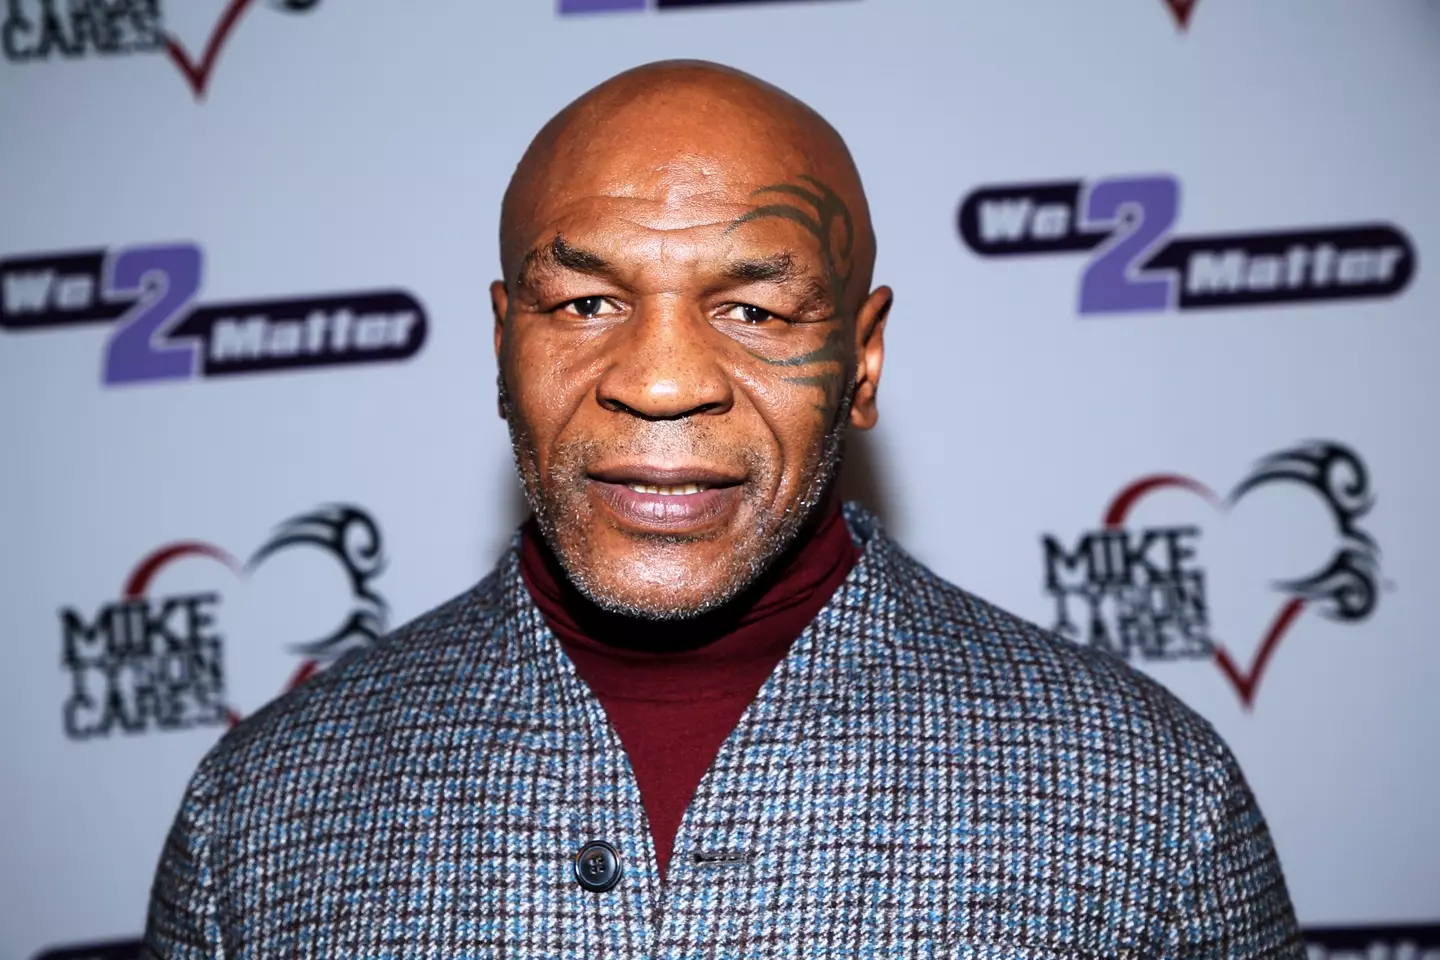 Mike Tyson has wrapped up his Hotboxin' podcast.